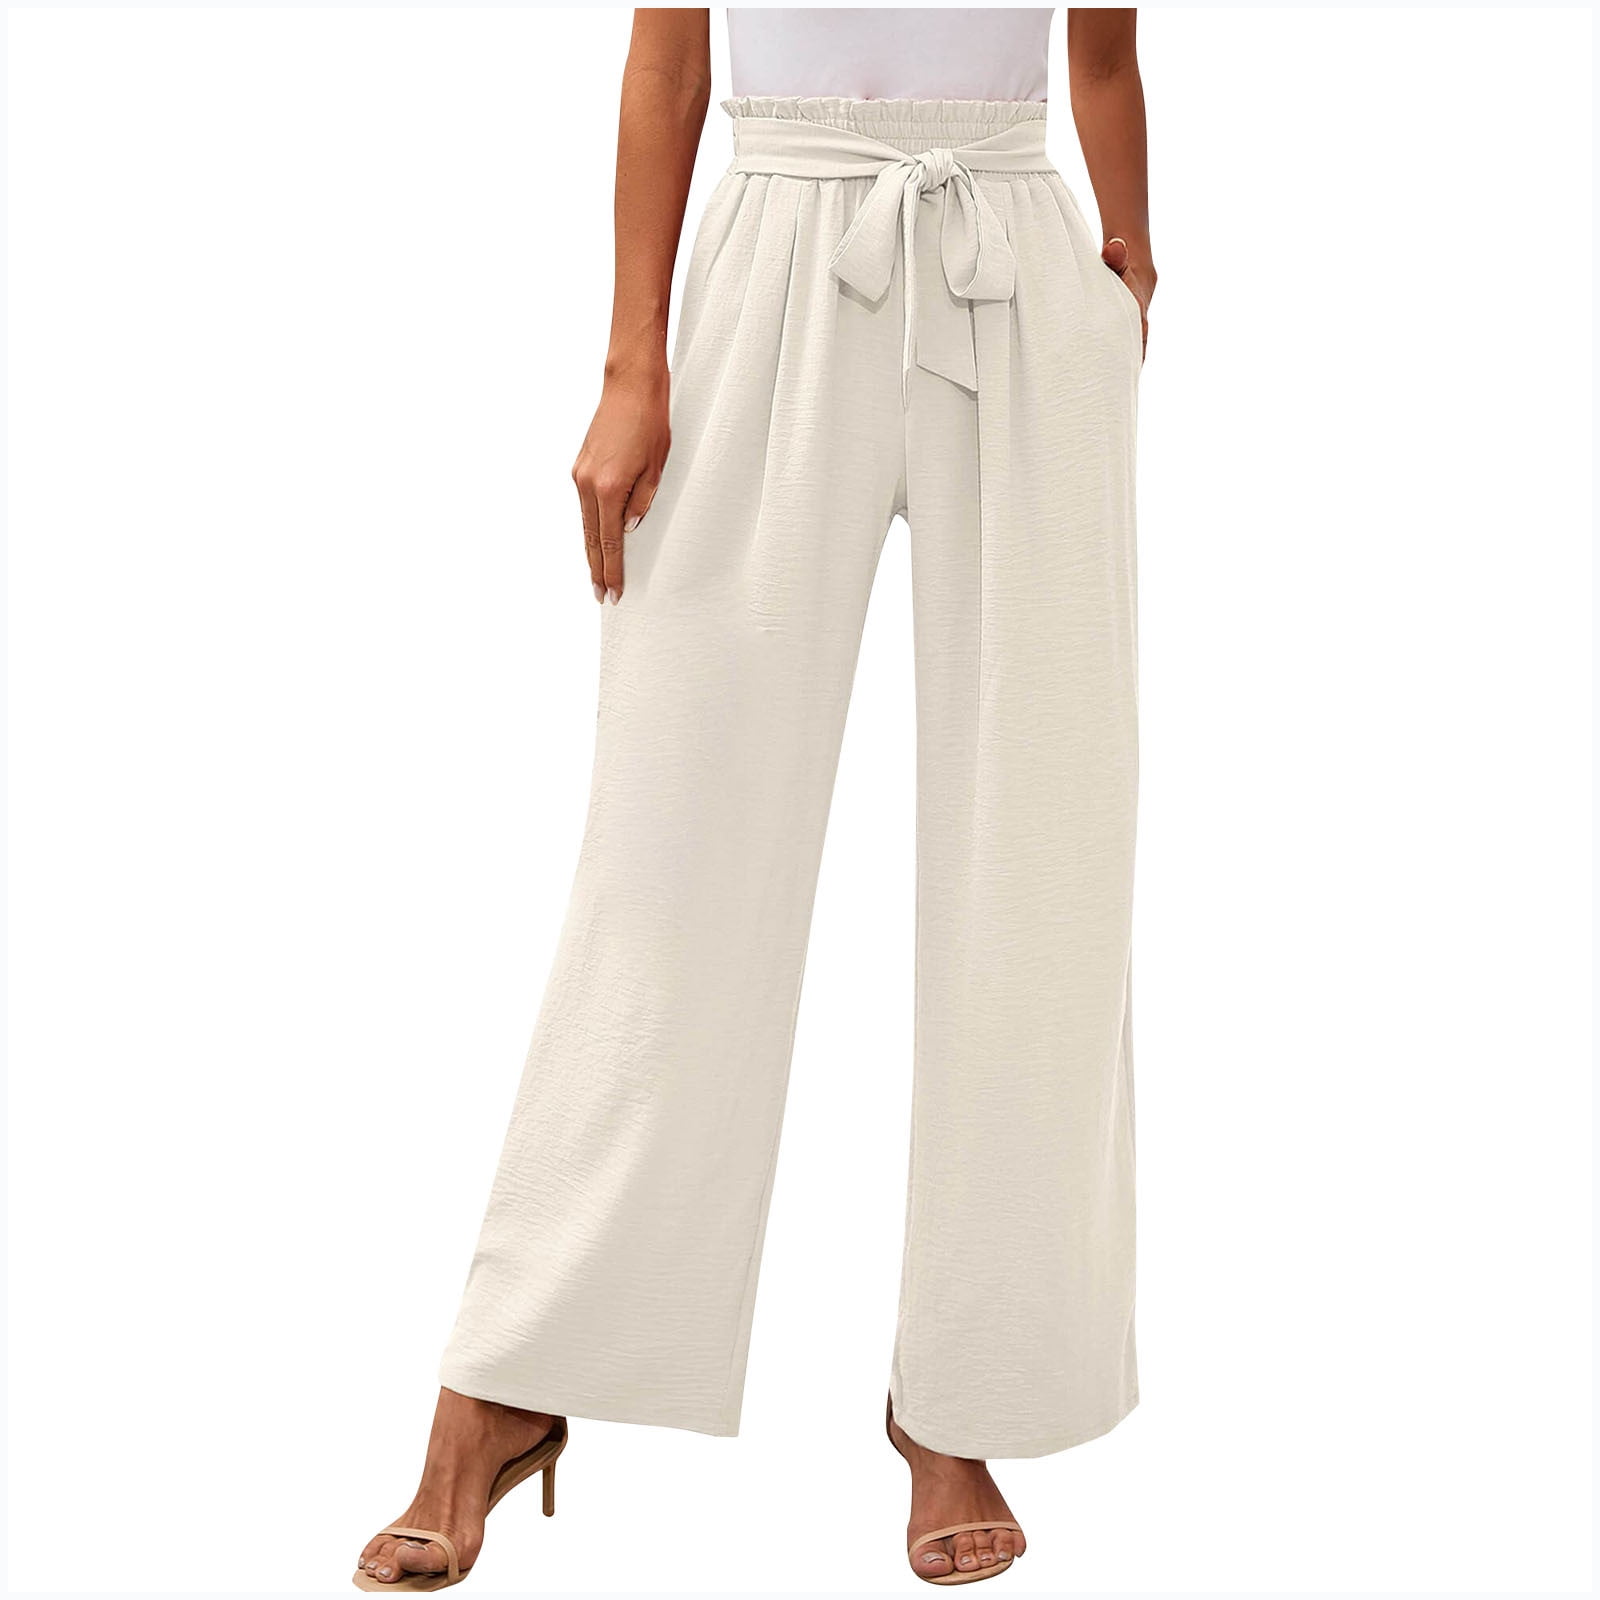 Womens Palazzo Long Pants High Waist Wide Leg Stretchy Loose Fit Casual  Trousers with Pocket 